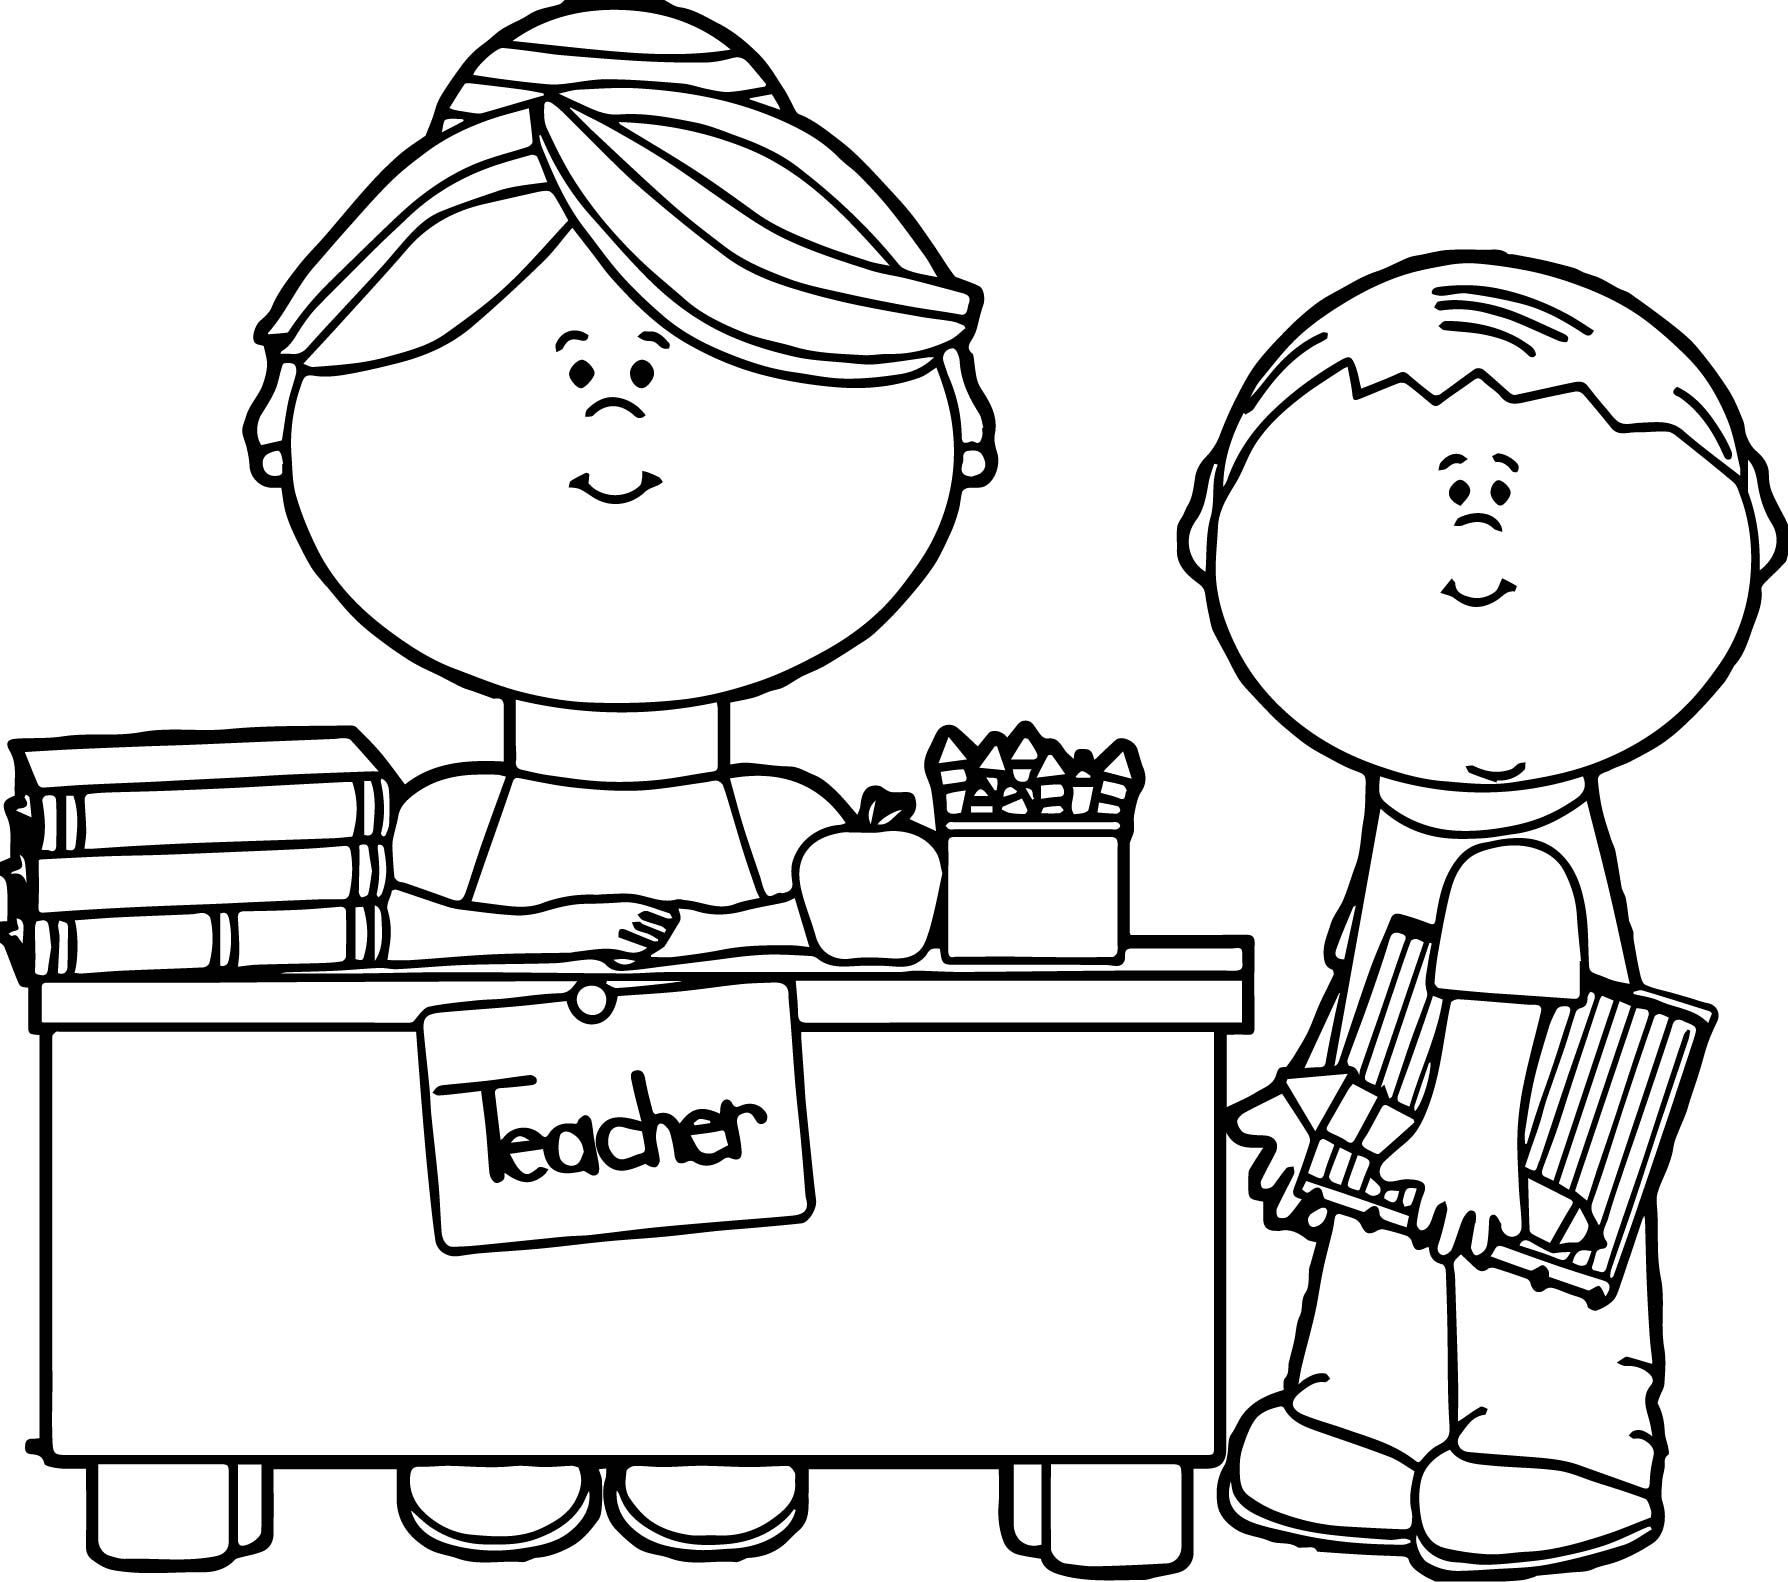 Kid Coloring Pages Teacher